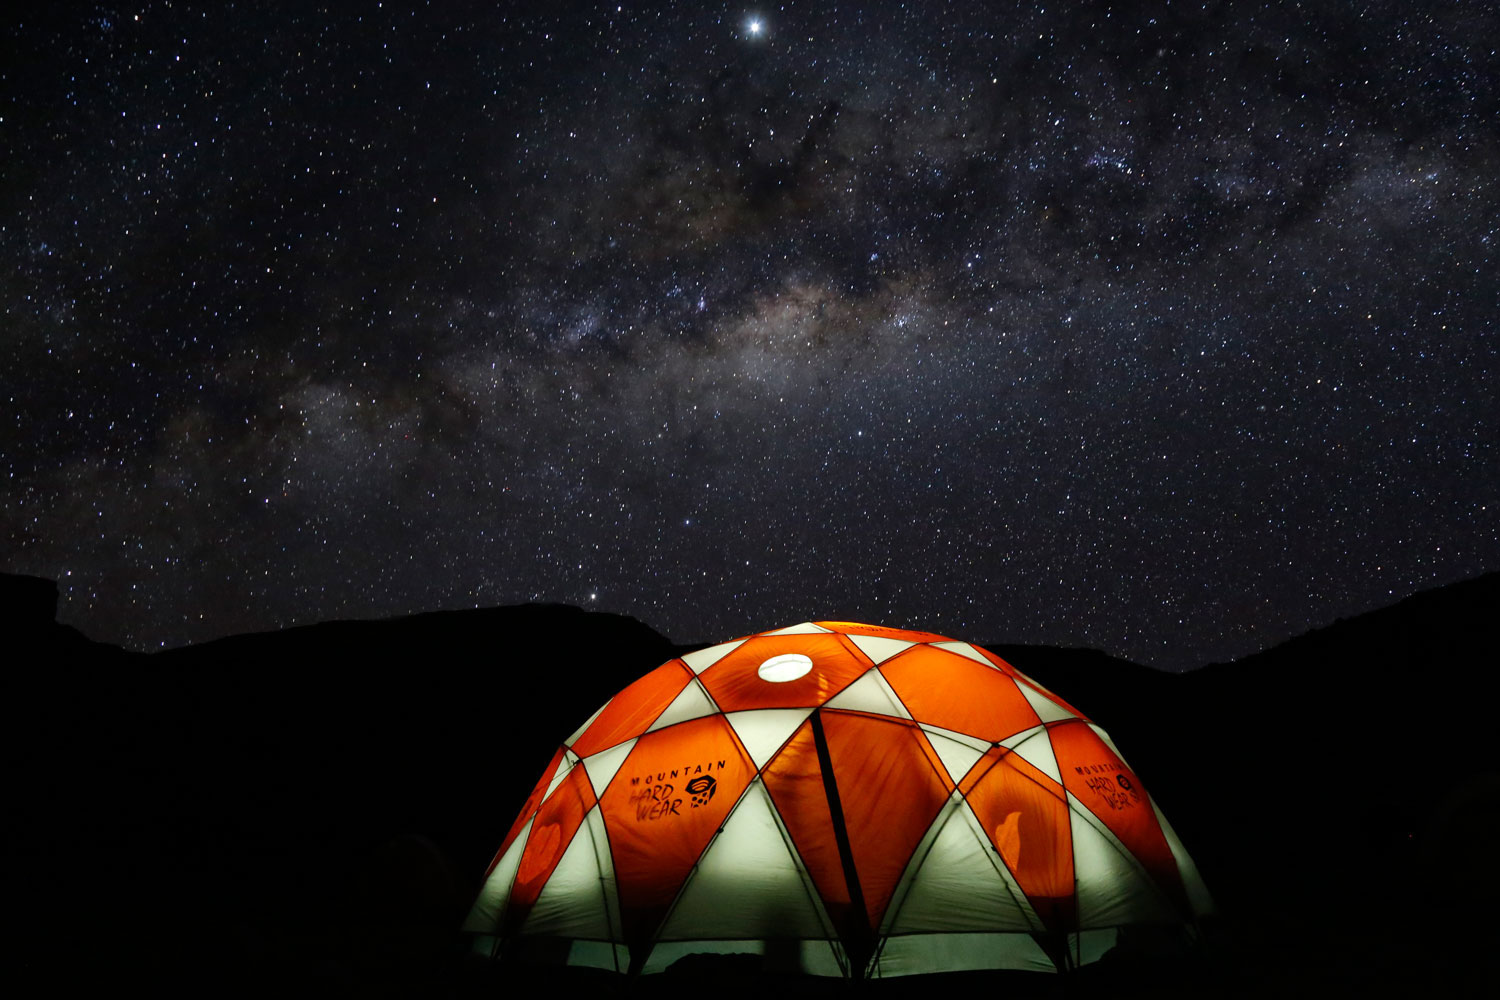 Glowing mess tent with the Milky Way in the background on the Northern Circuit Kilimanjaro